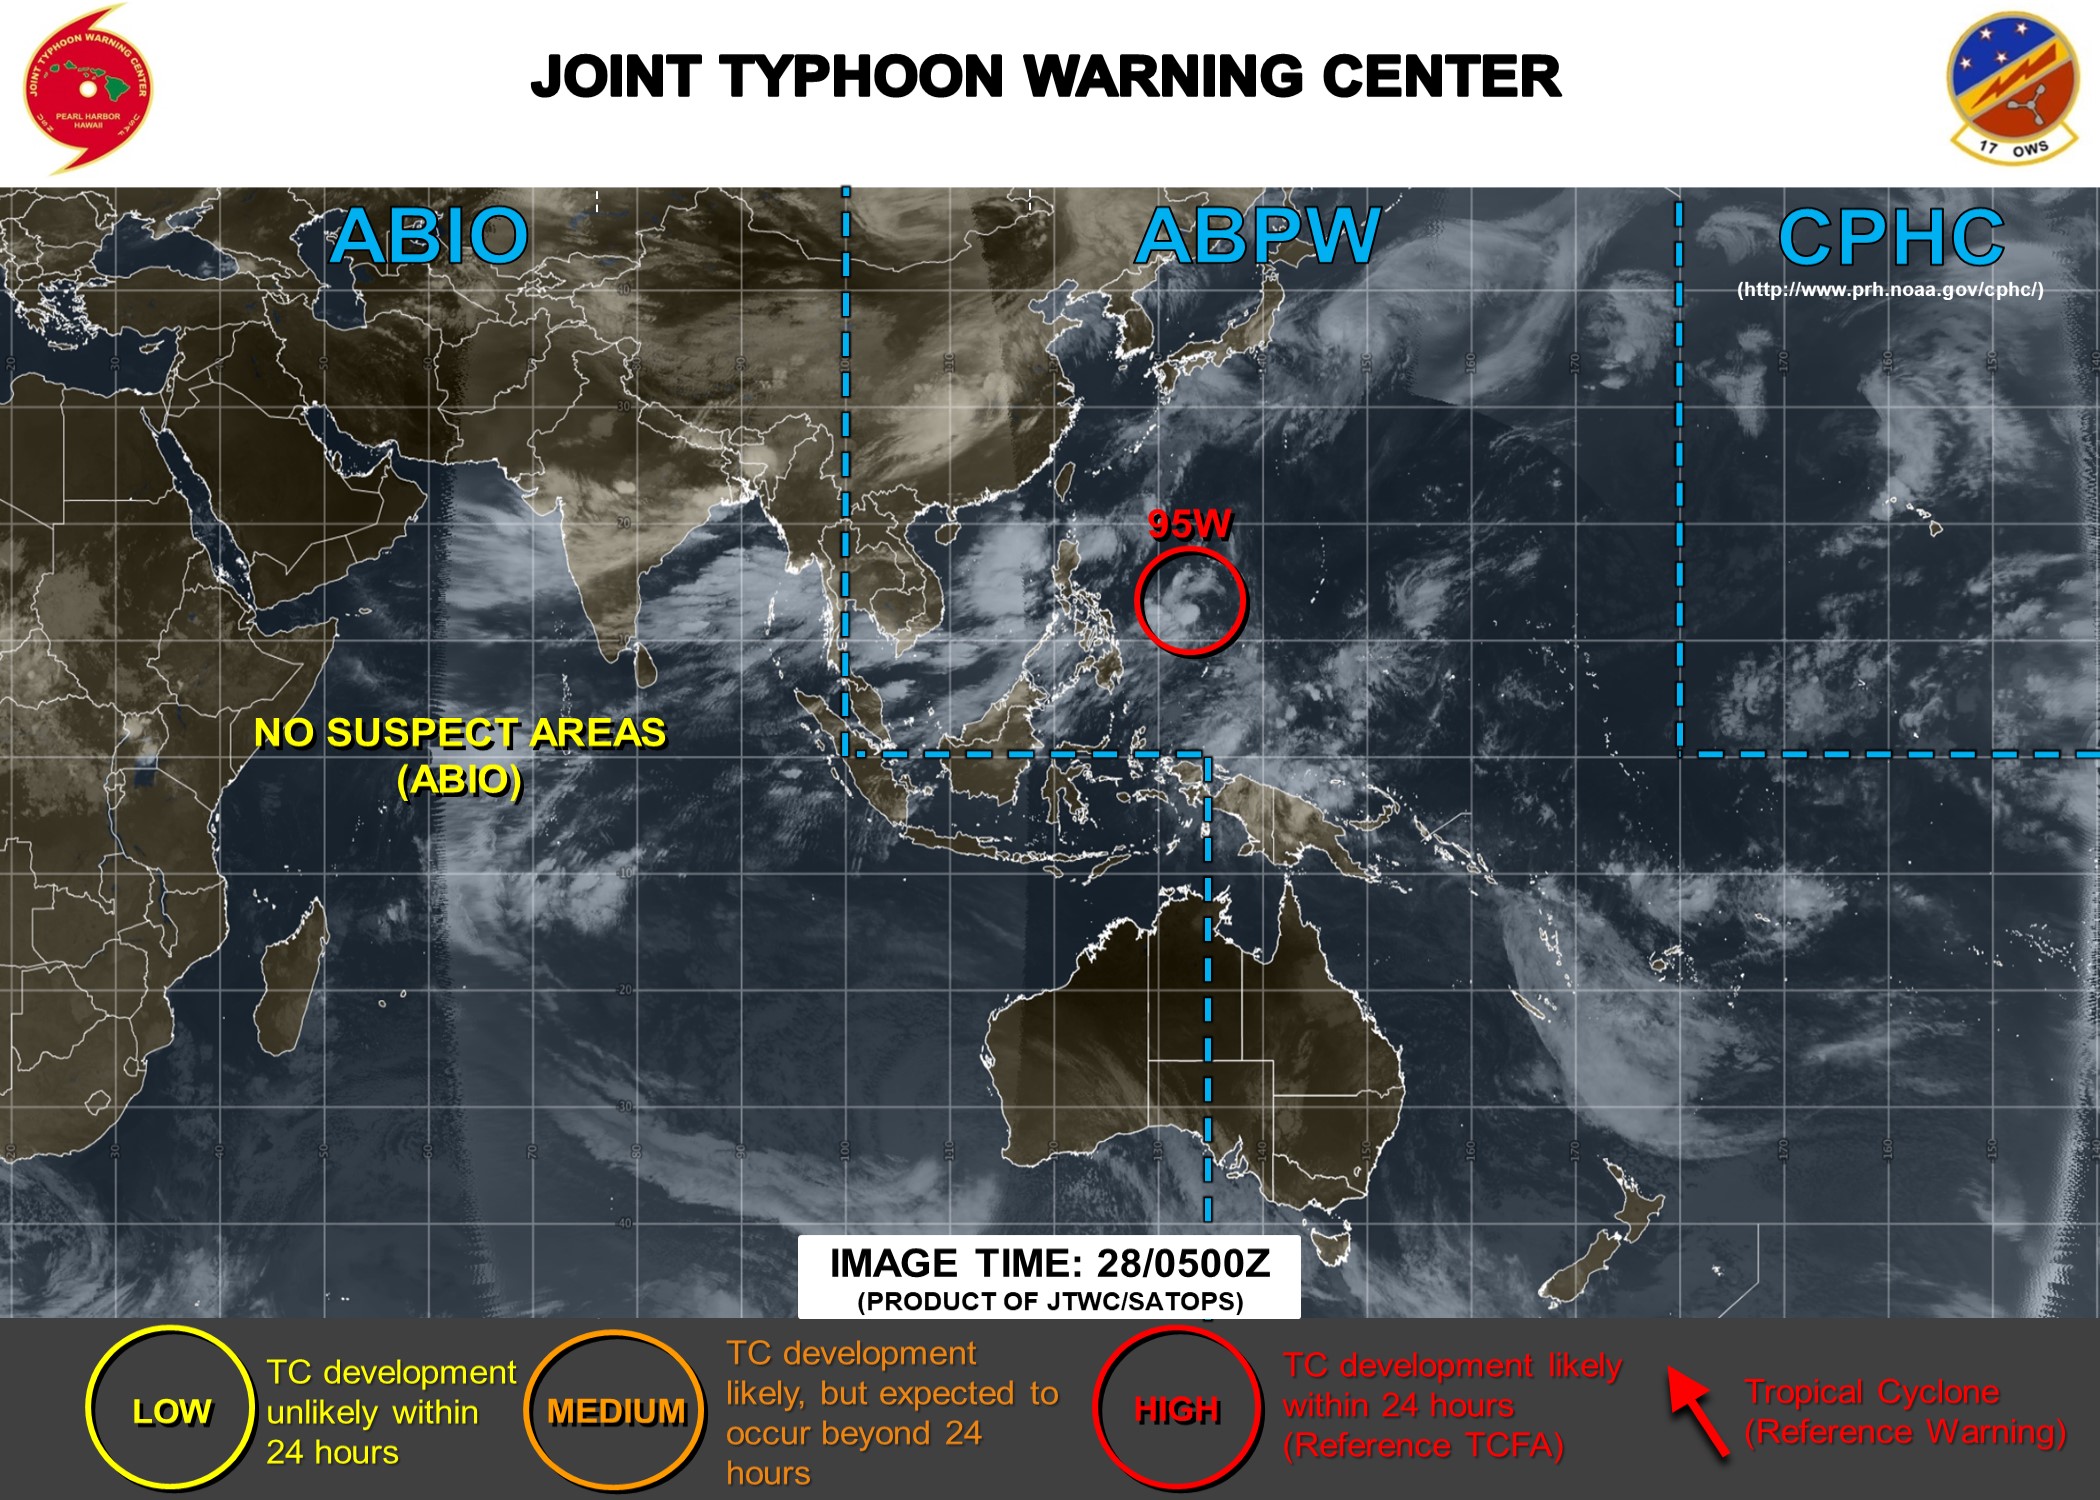 INVEST 95W is likely to develop into a tropical depression within 24/48hours. TCFA issued by the JTWC